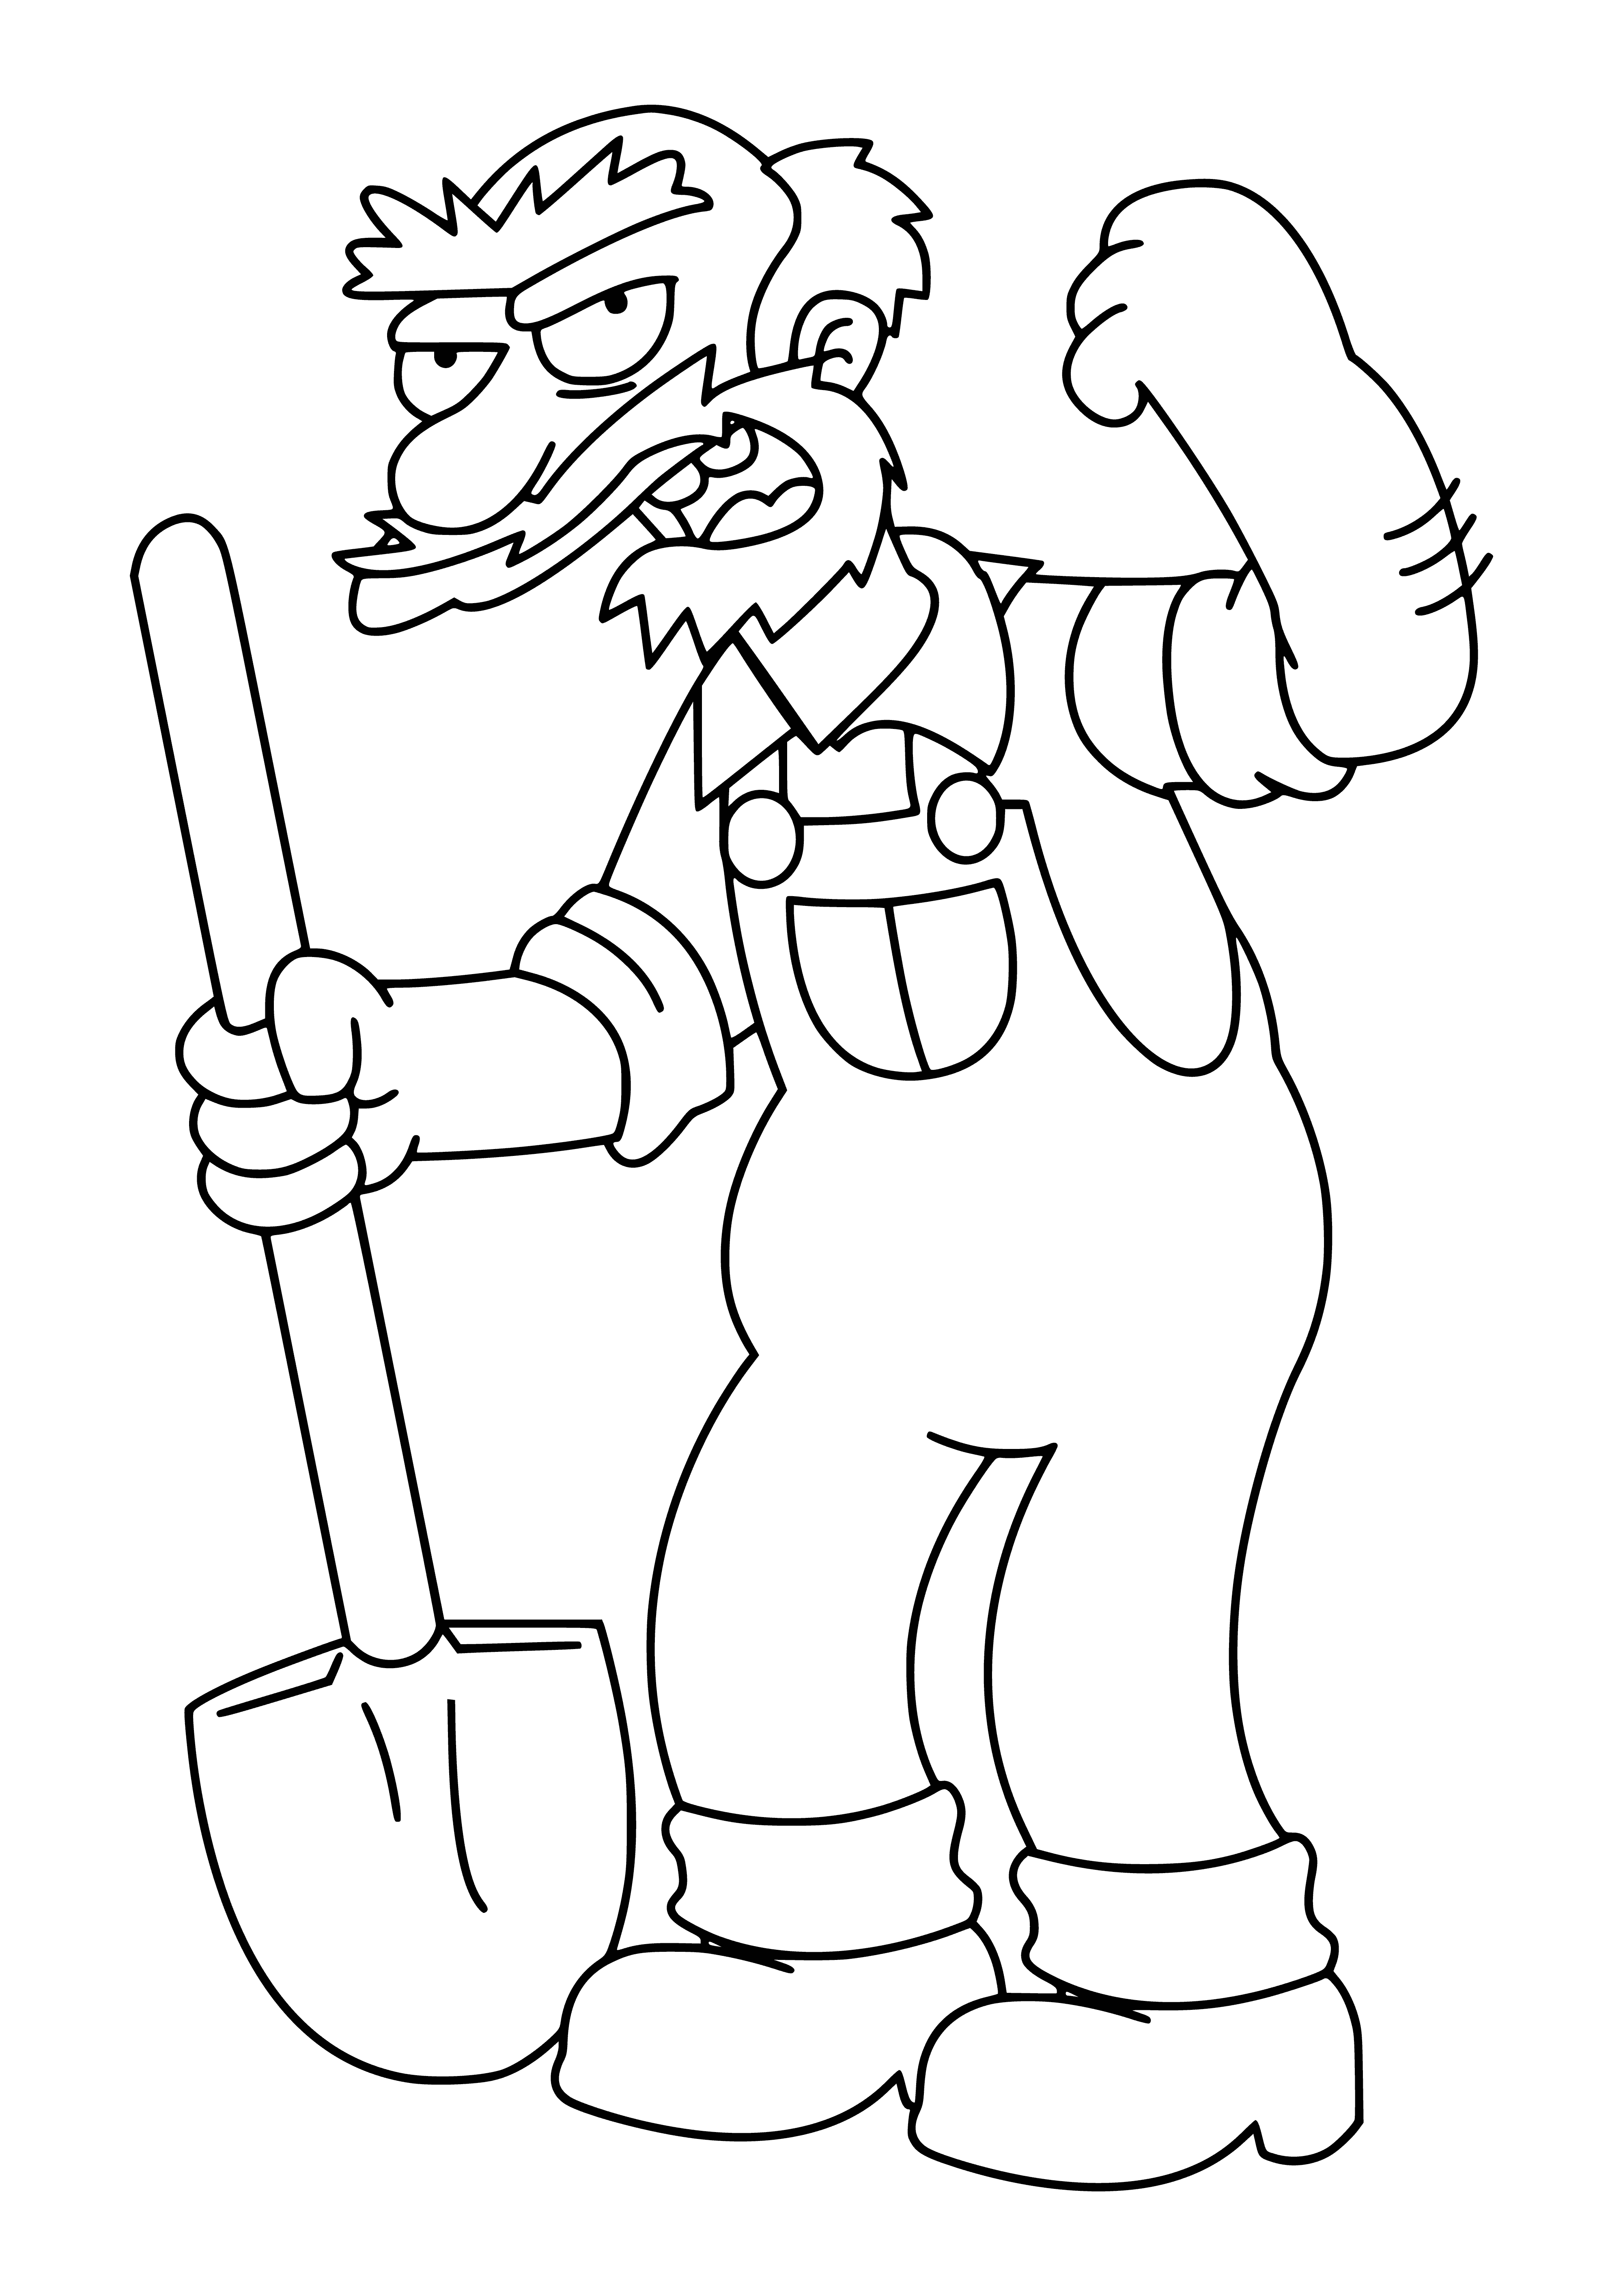 Gardener Willie coloring page